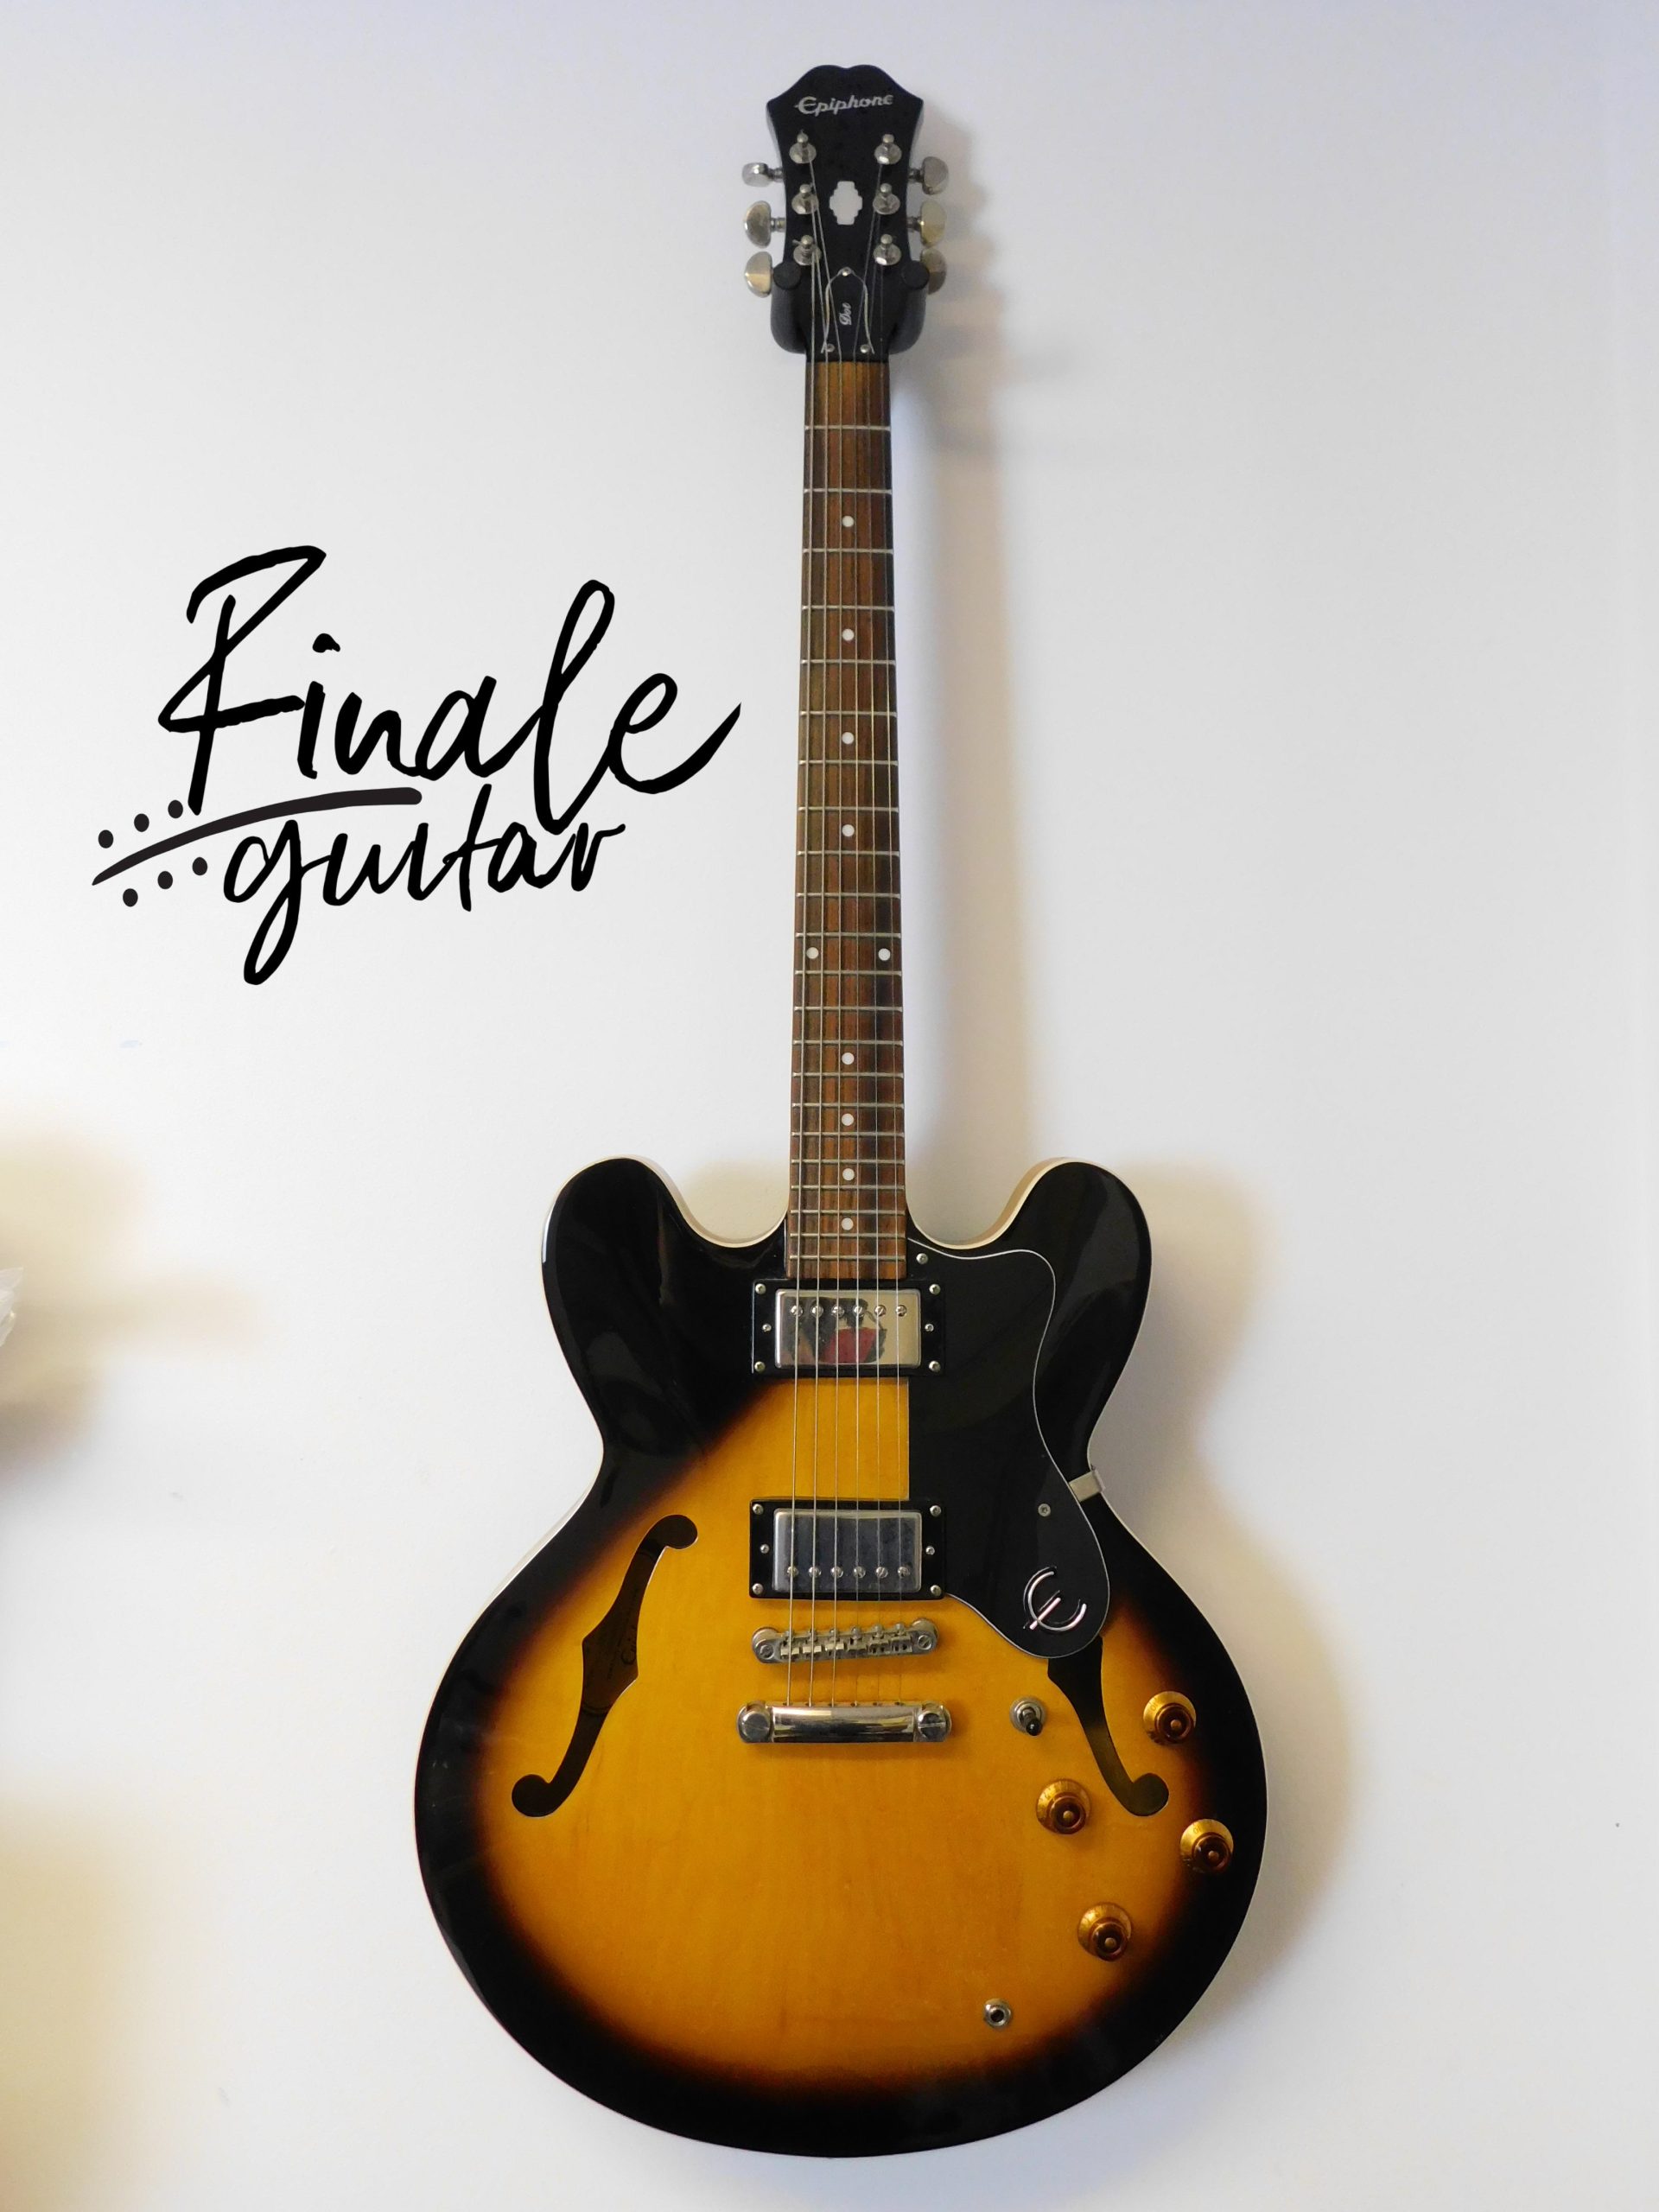 Epiphone DOT semi-hollow electric guitar for sale in our Sheffield guitar shop, Finale Guitar